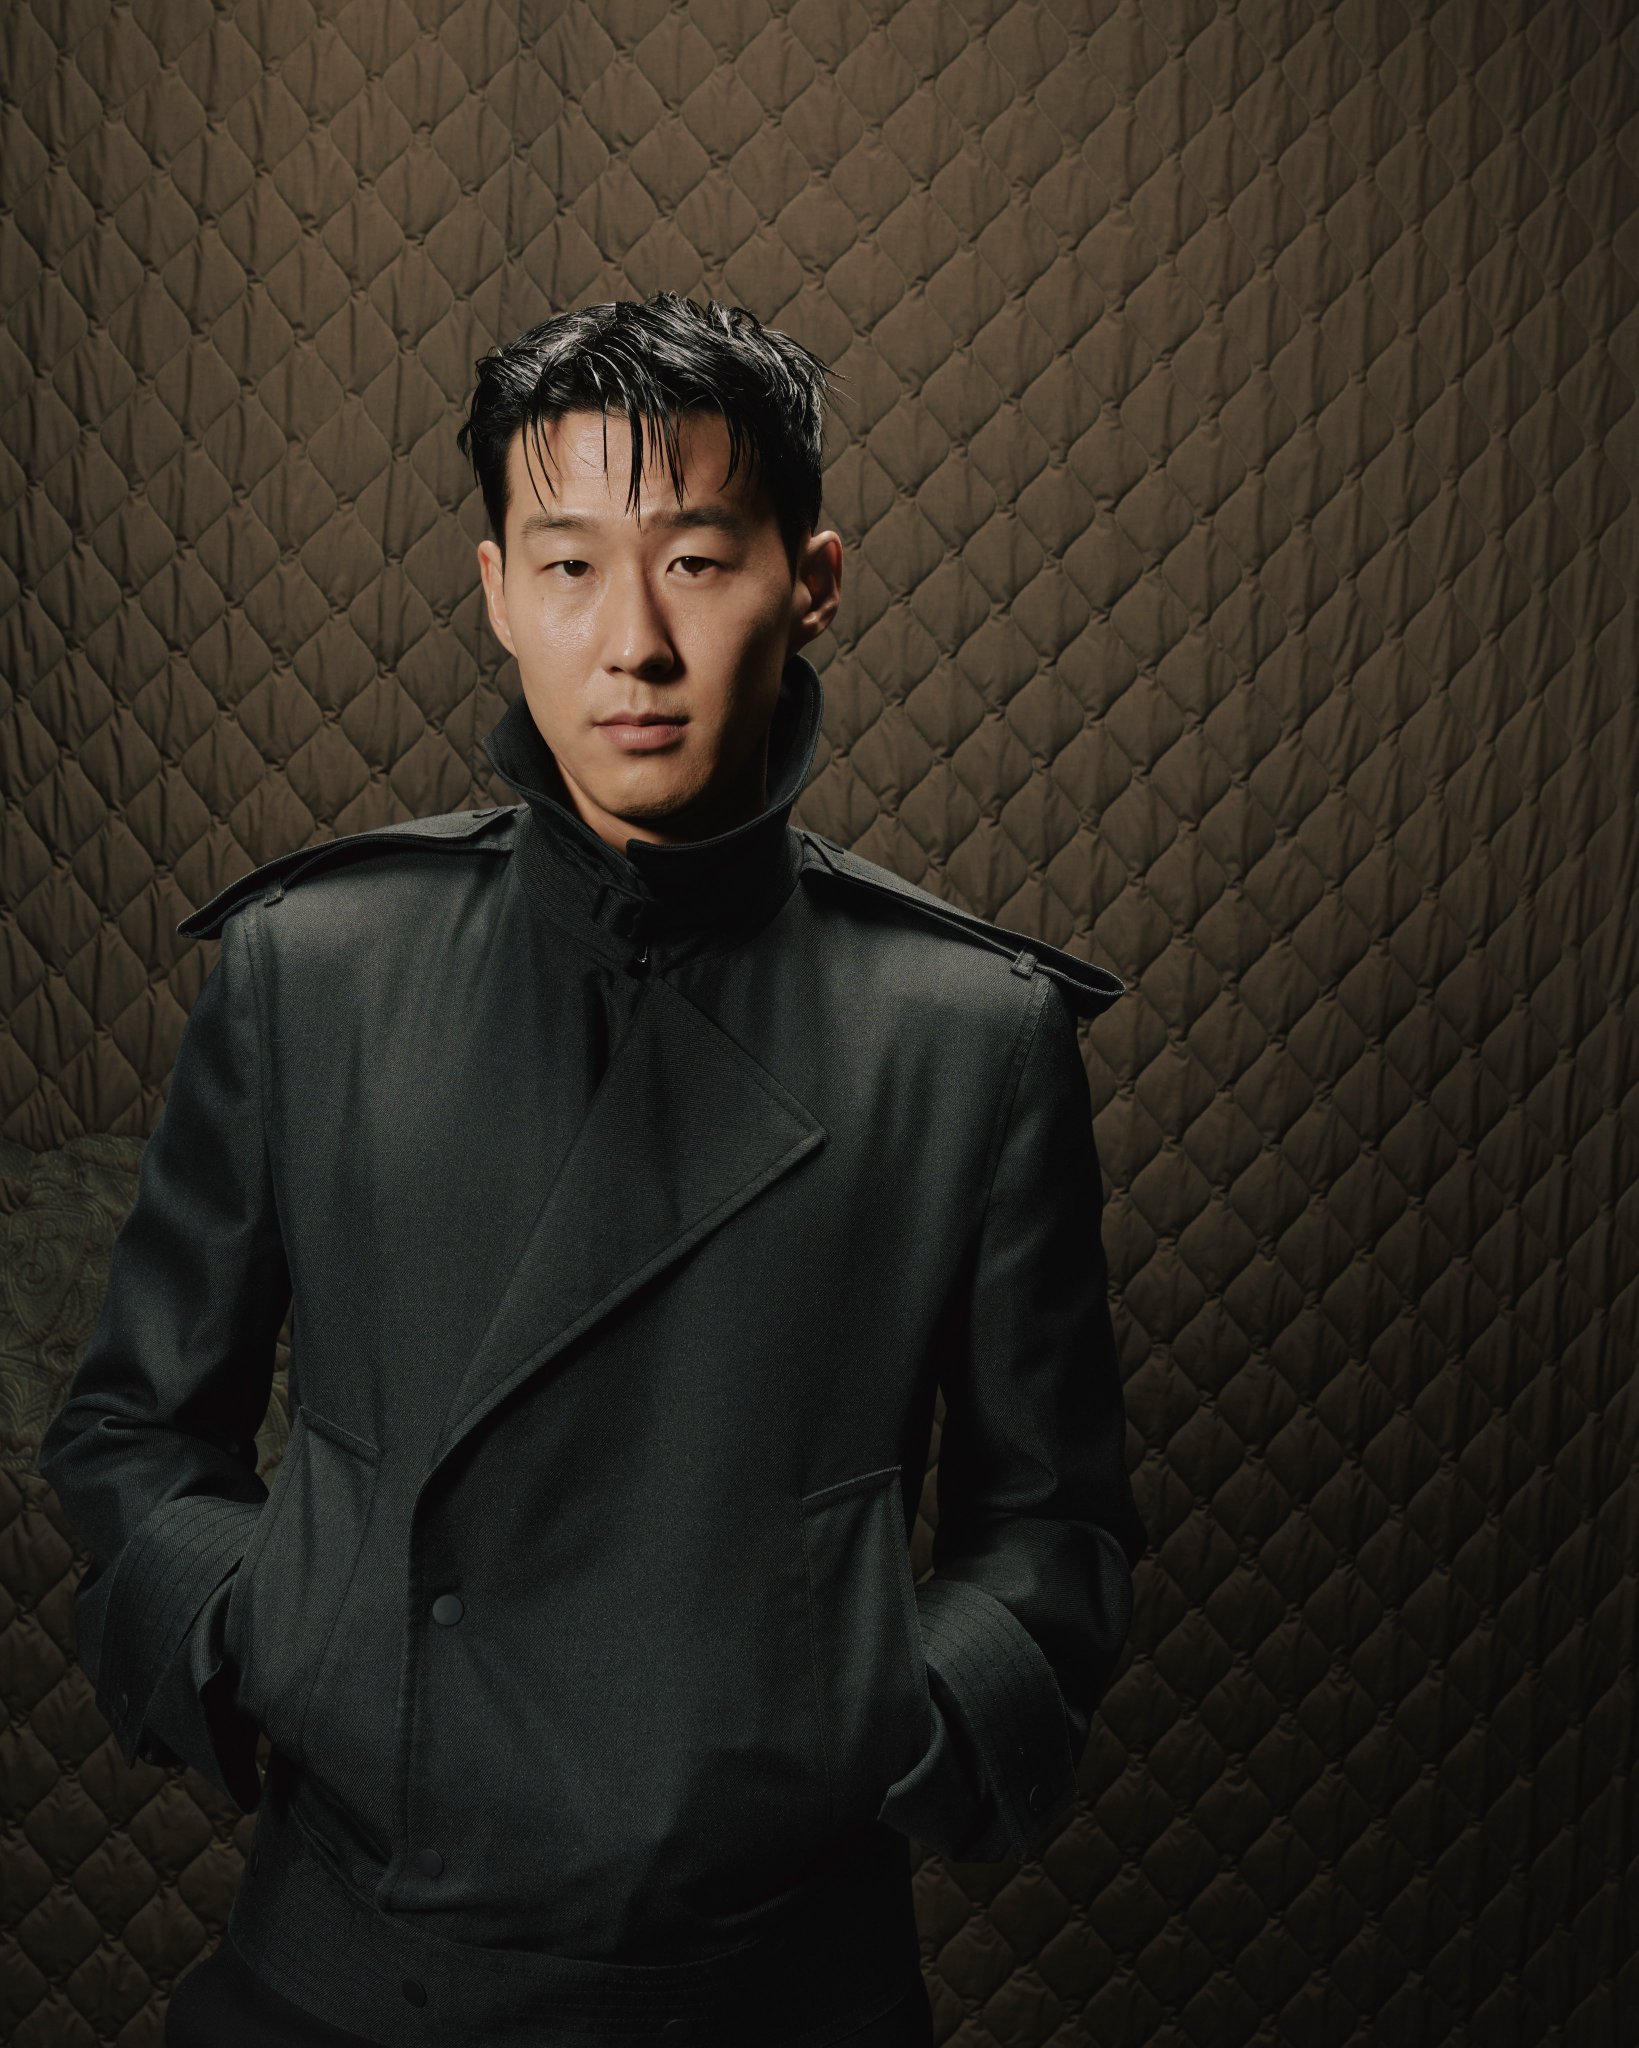 Loving the Burberry Jacket Son Heung-min Wore at London Fashion Week? Here’s What it Costs